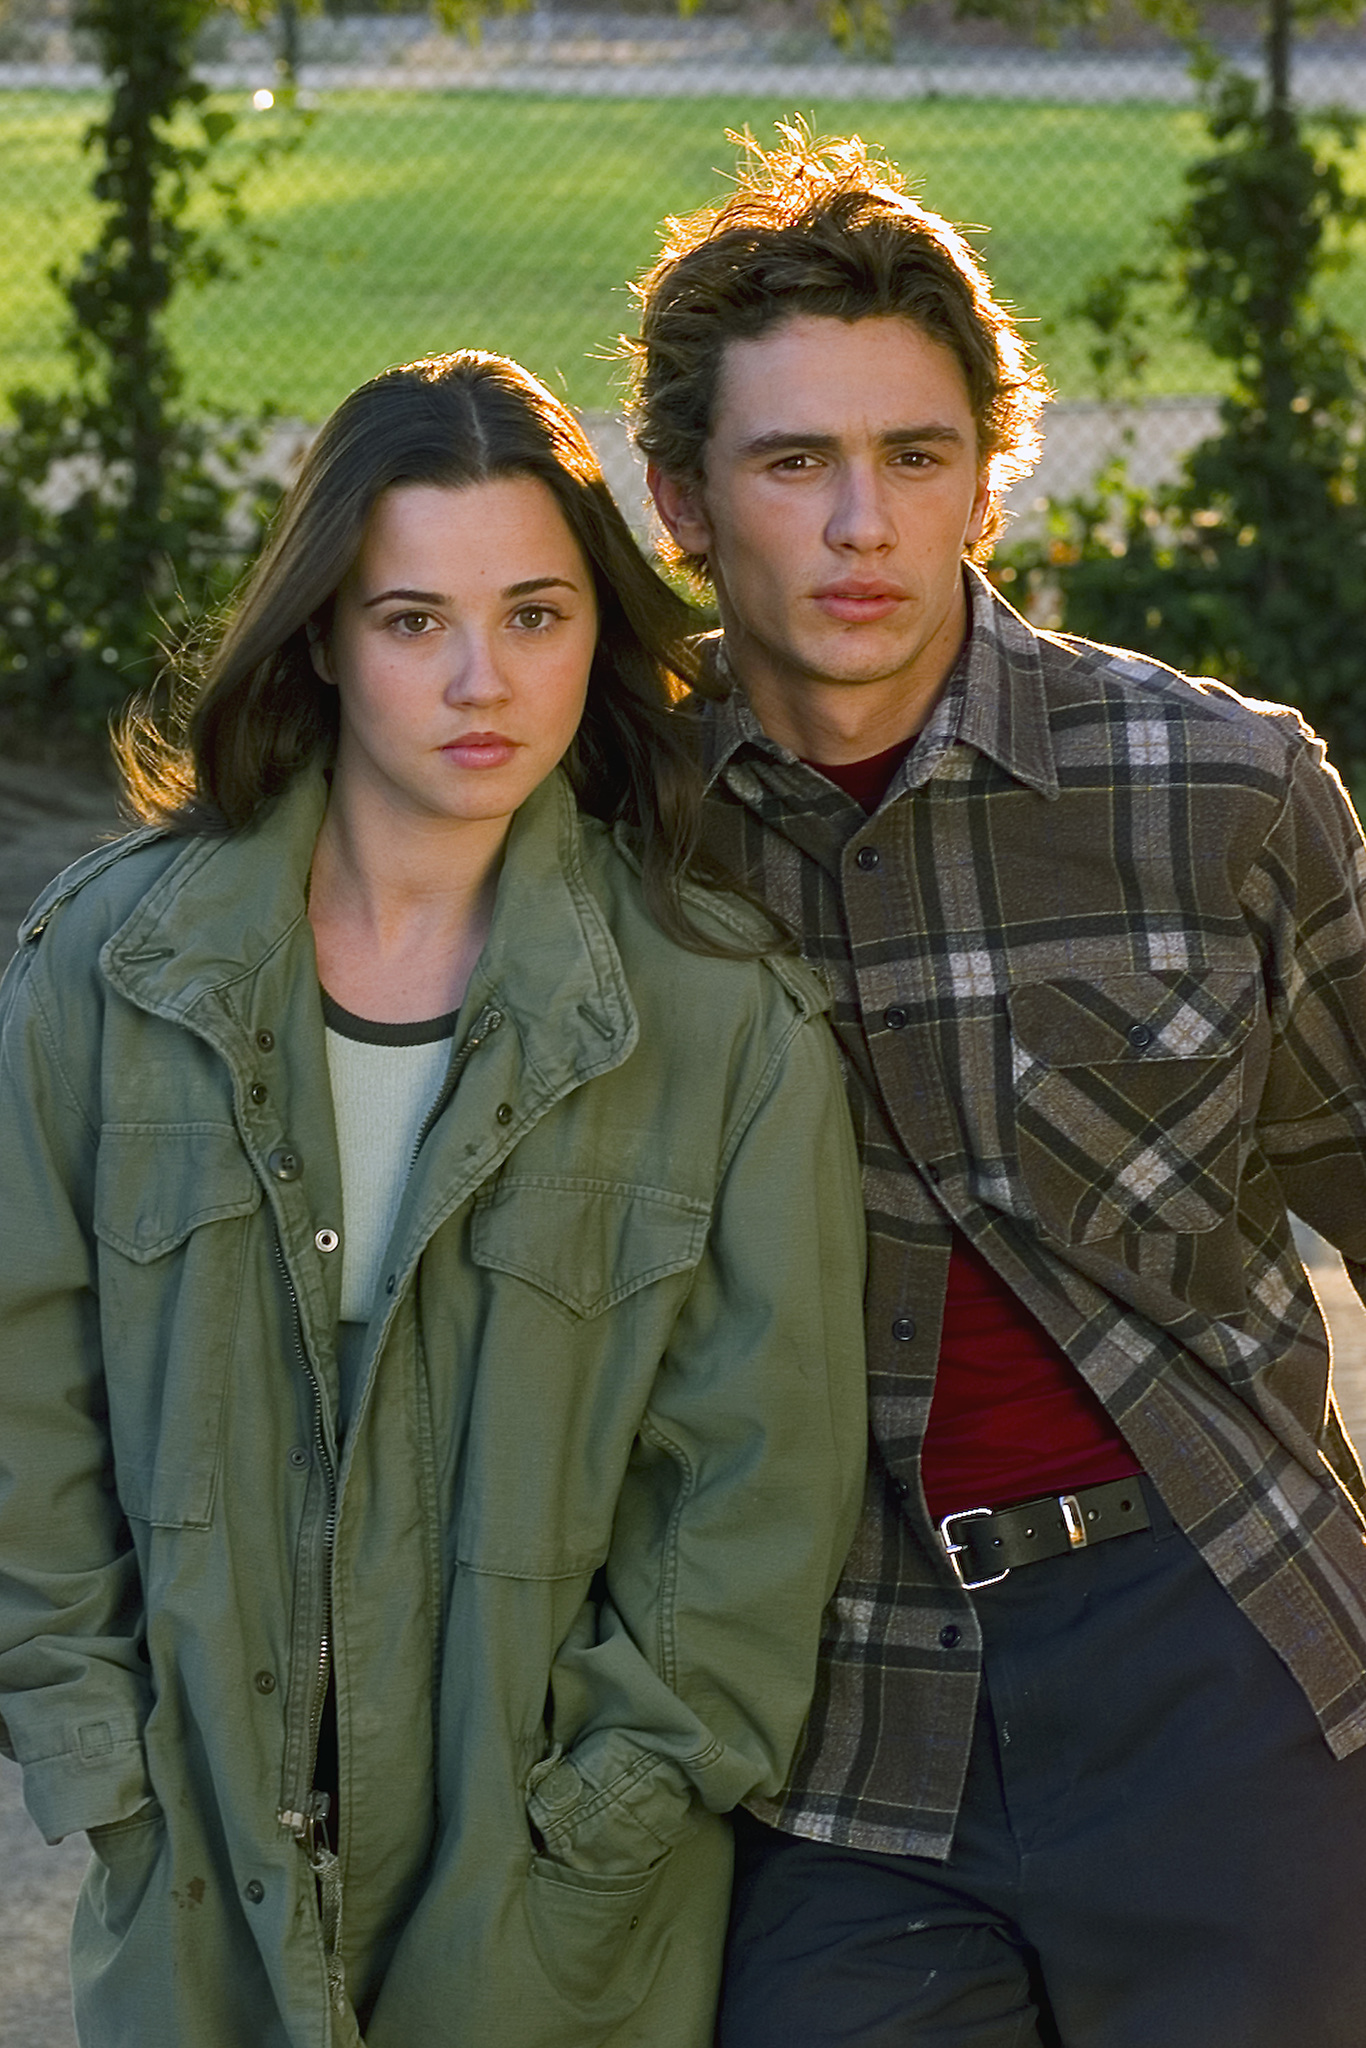 Still of Linda Cardellini and James Franco in Freaks and Geeks (1999)